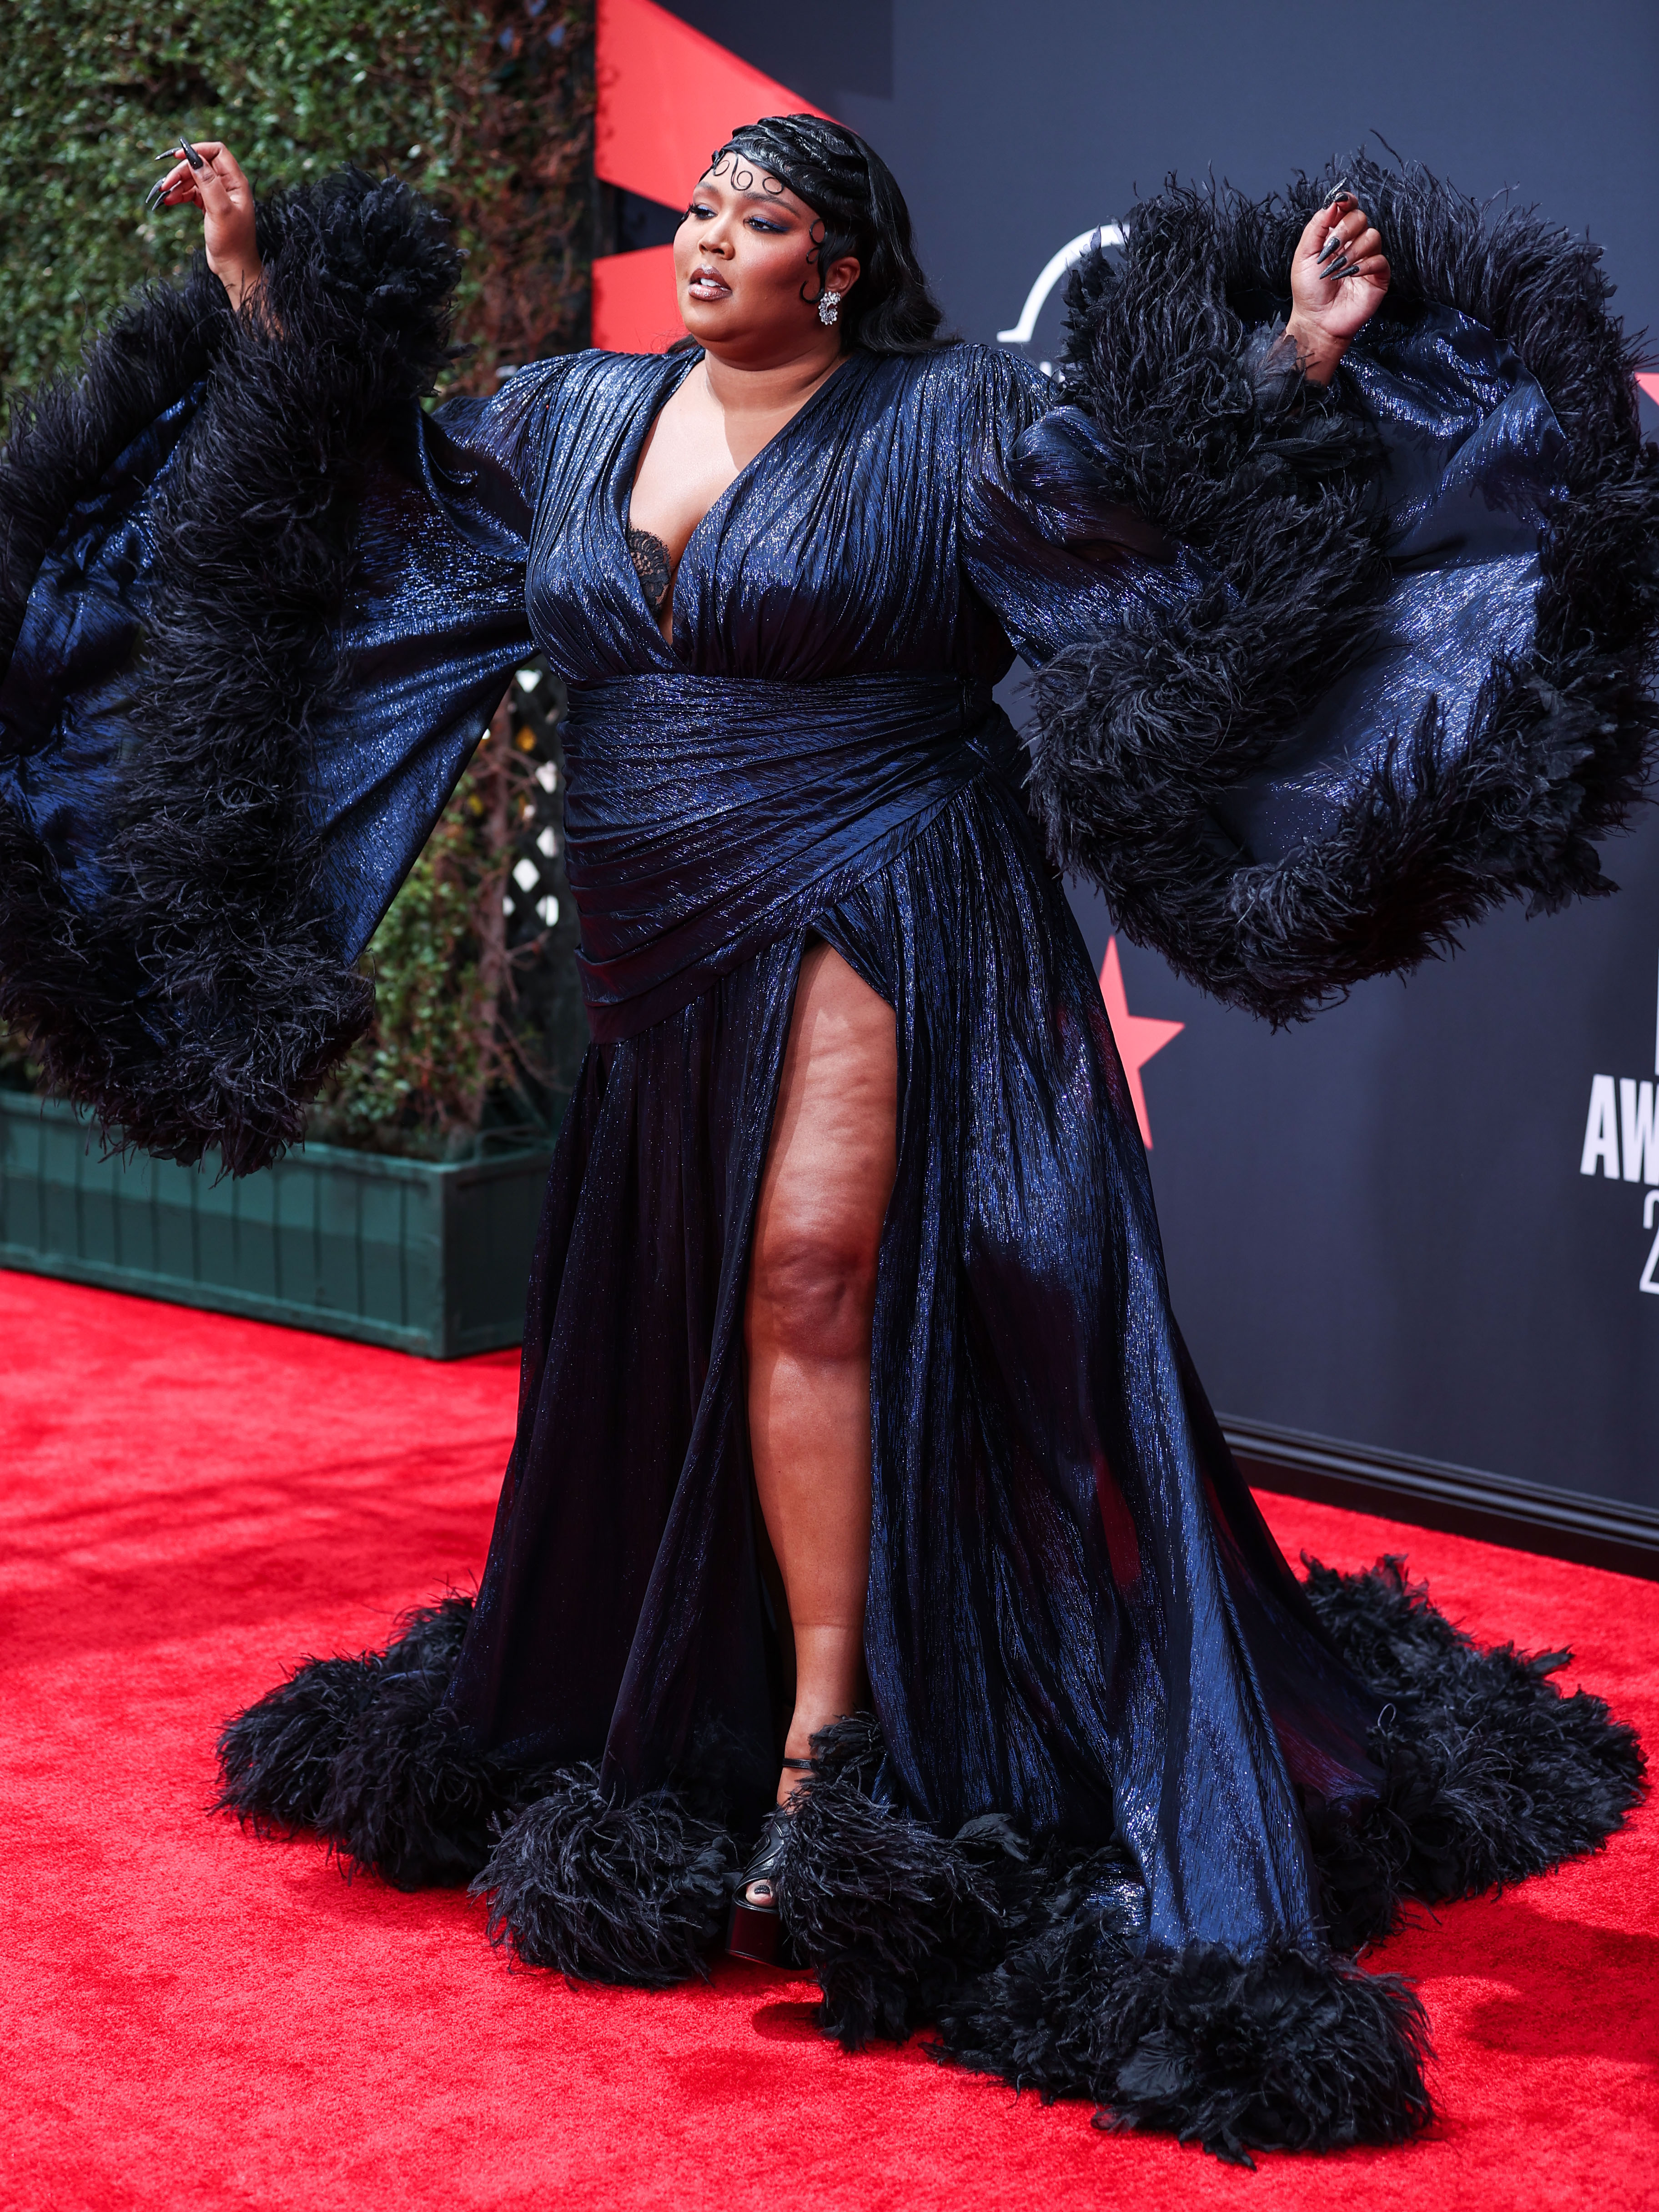 https://www.lifeandstylemag.com/wp-content/uploads/2022/10/slit-dresses-lizzo.jpg?fit=800%2C1067&quality=86&strip=all